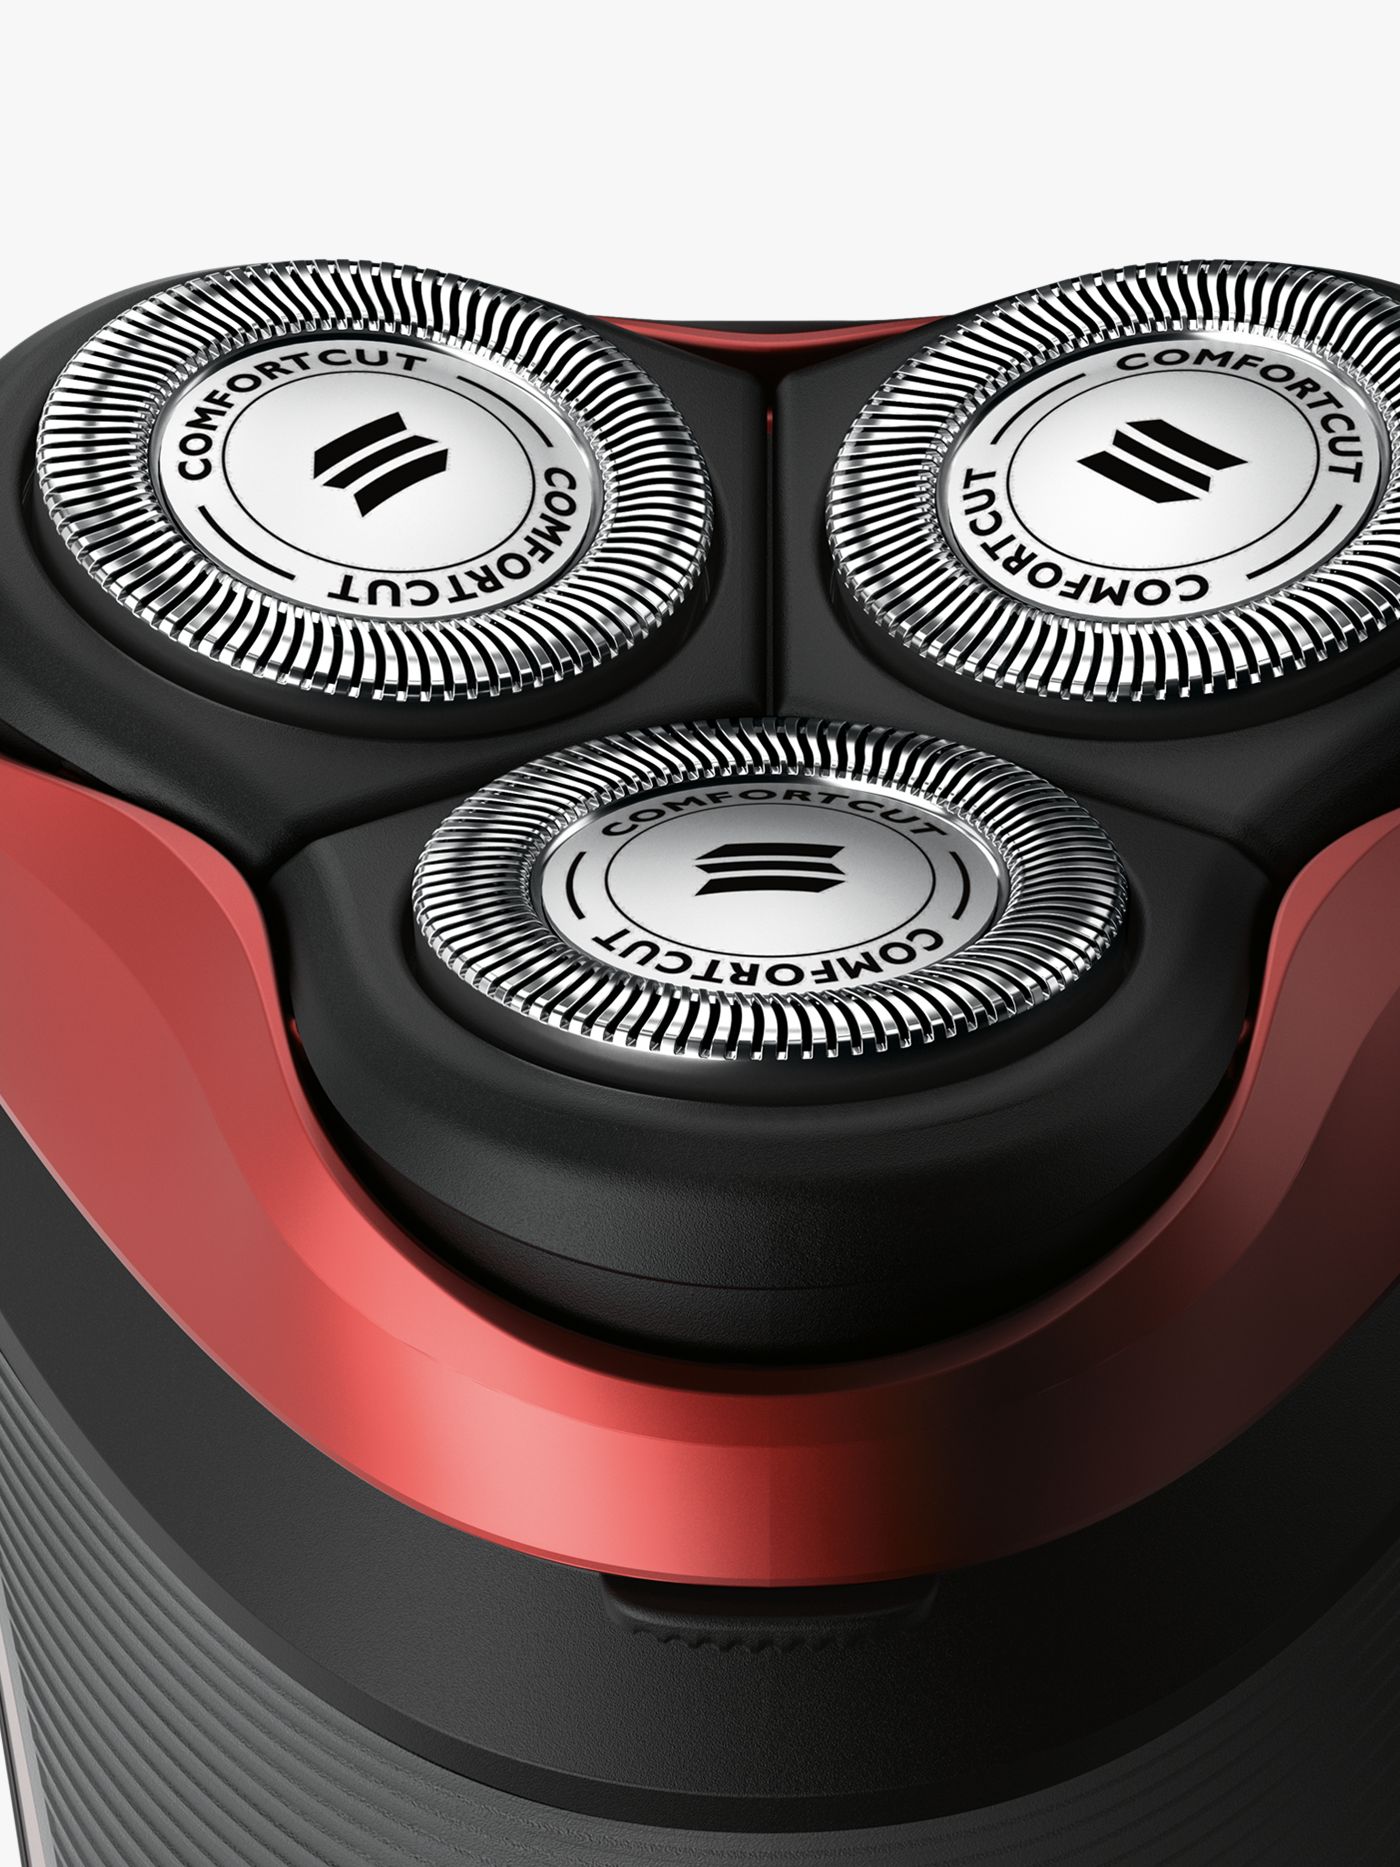 philips shaver s3580